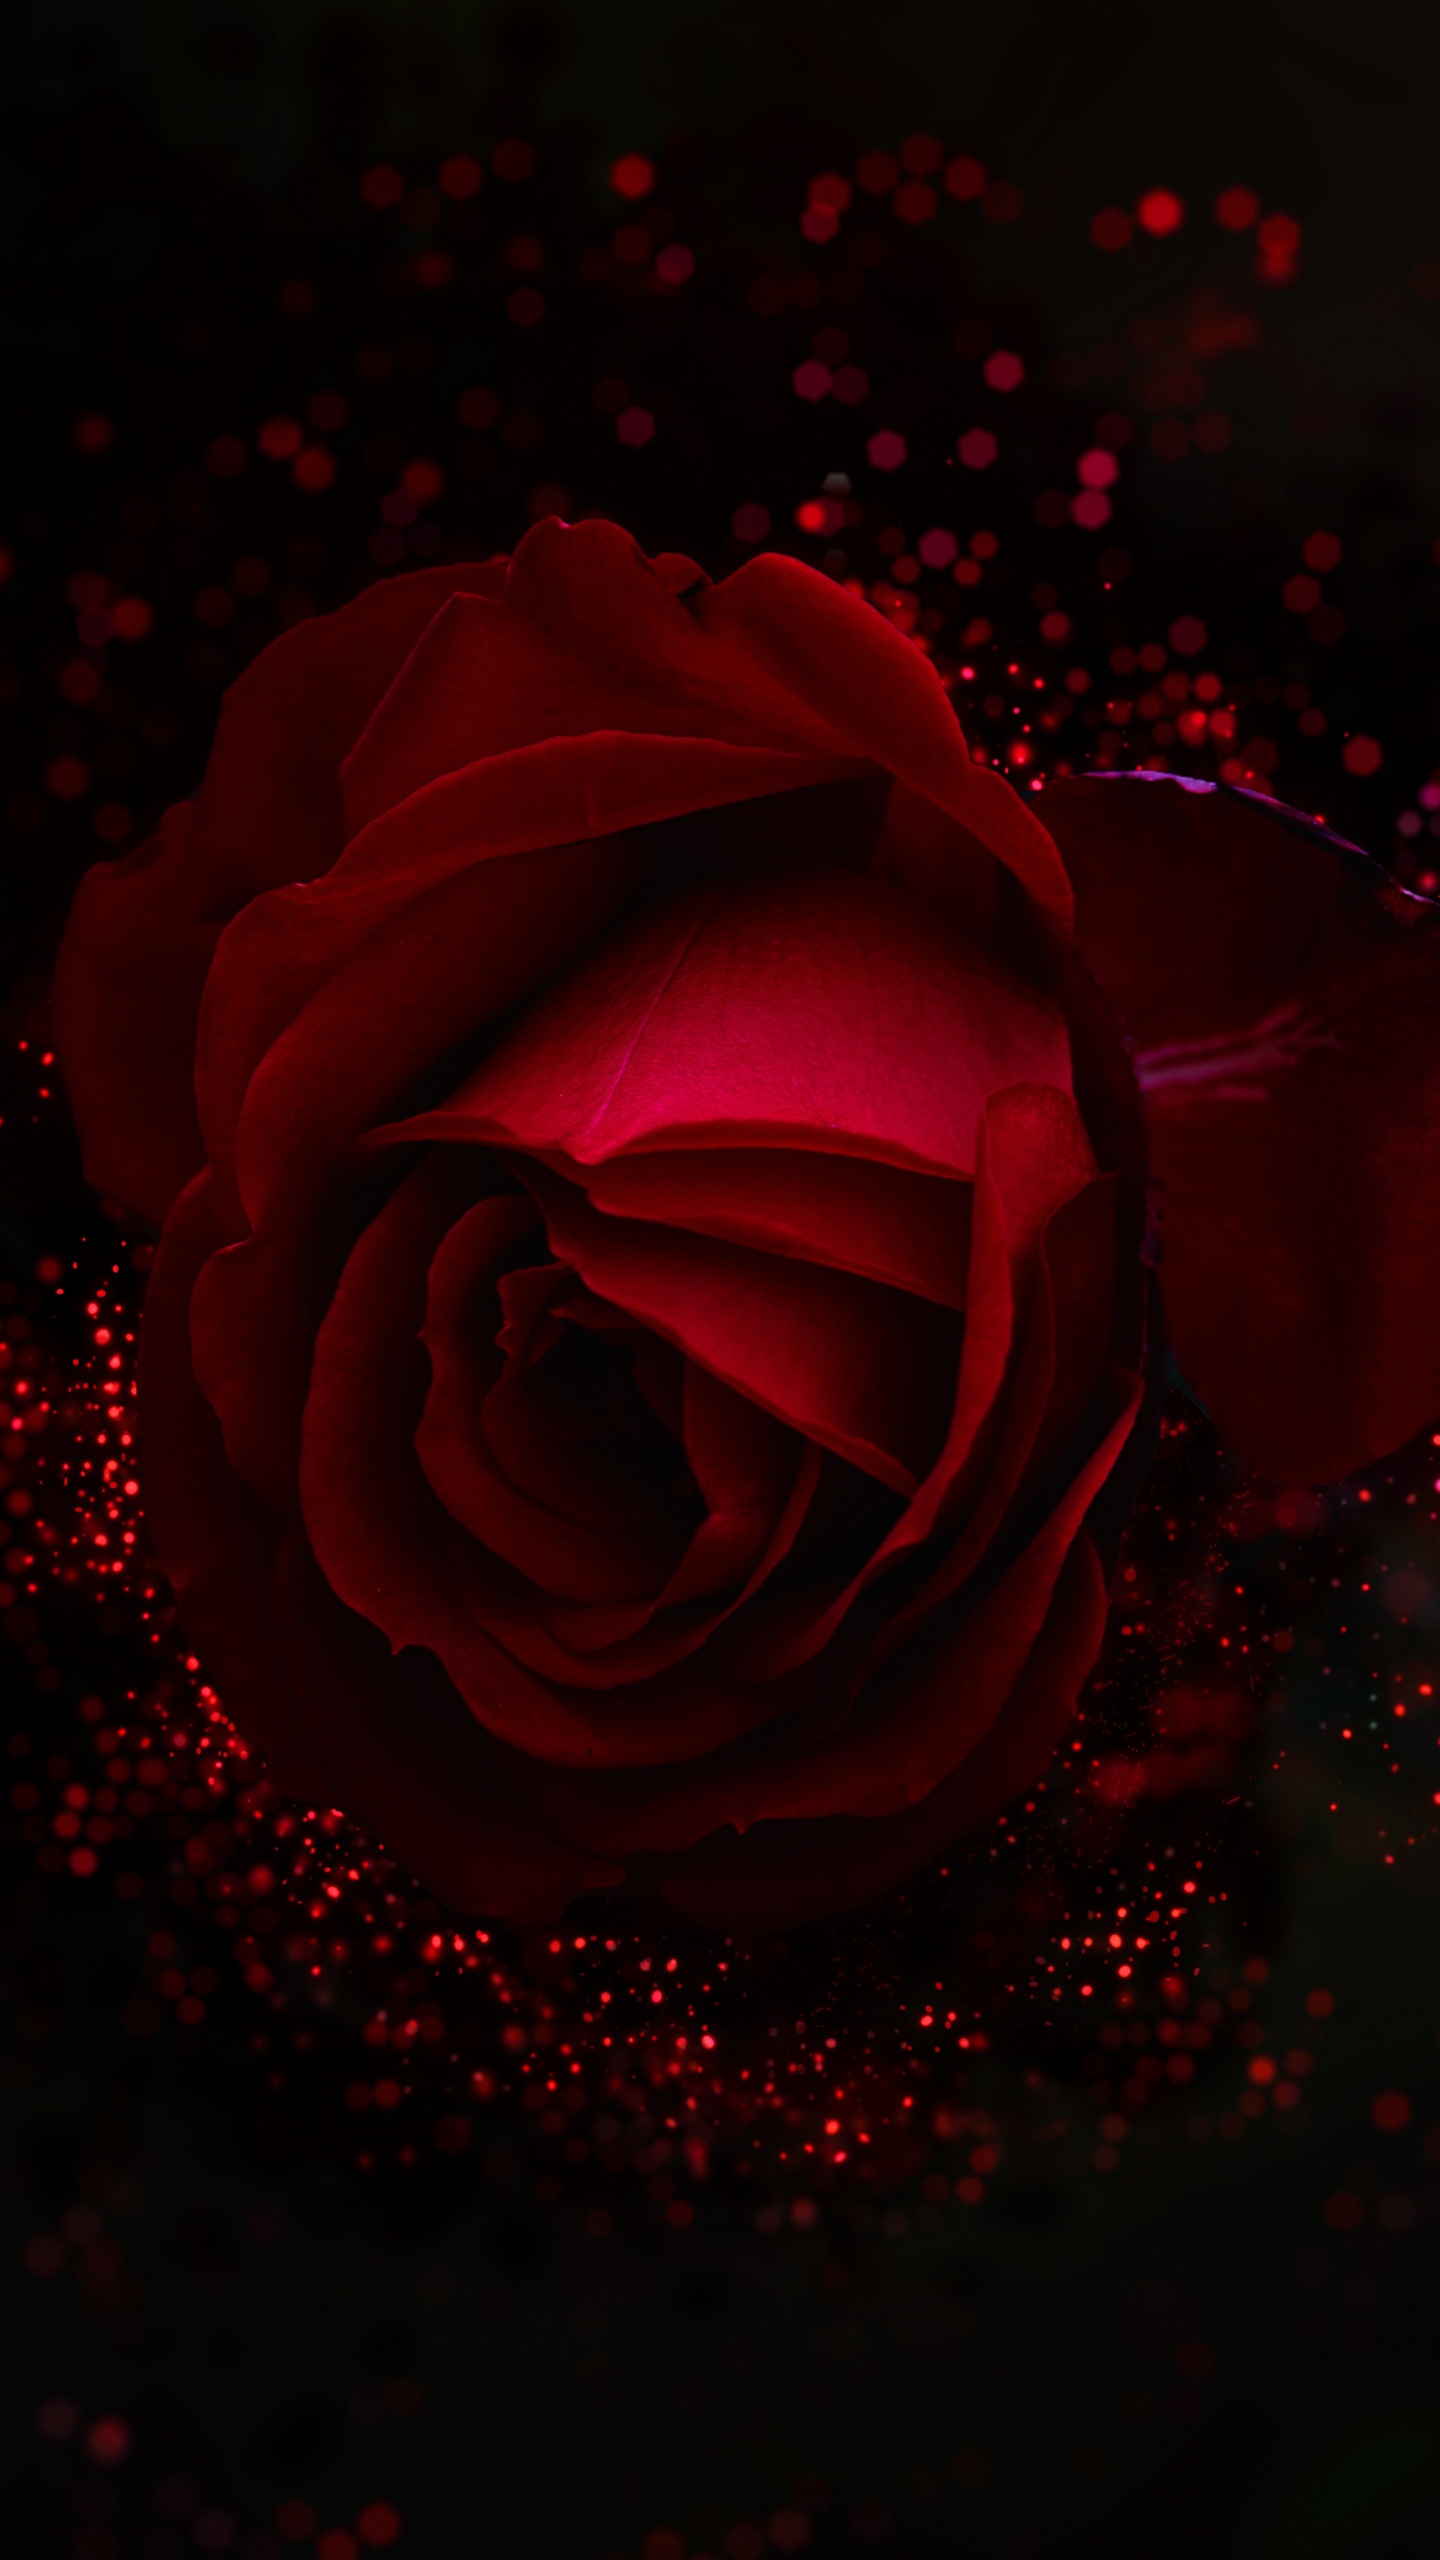 Red Rose With Water Droplets. Wallpaper in 1440x2560 Resolution